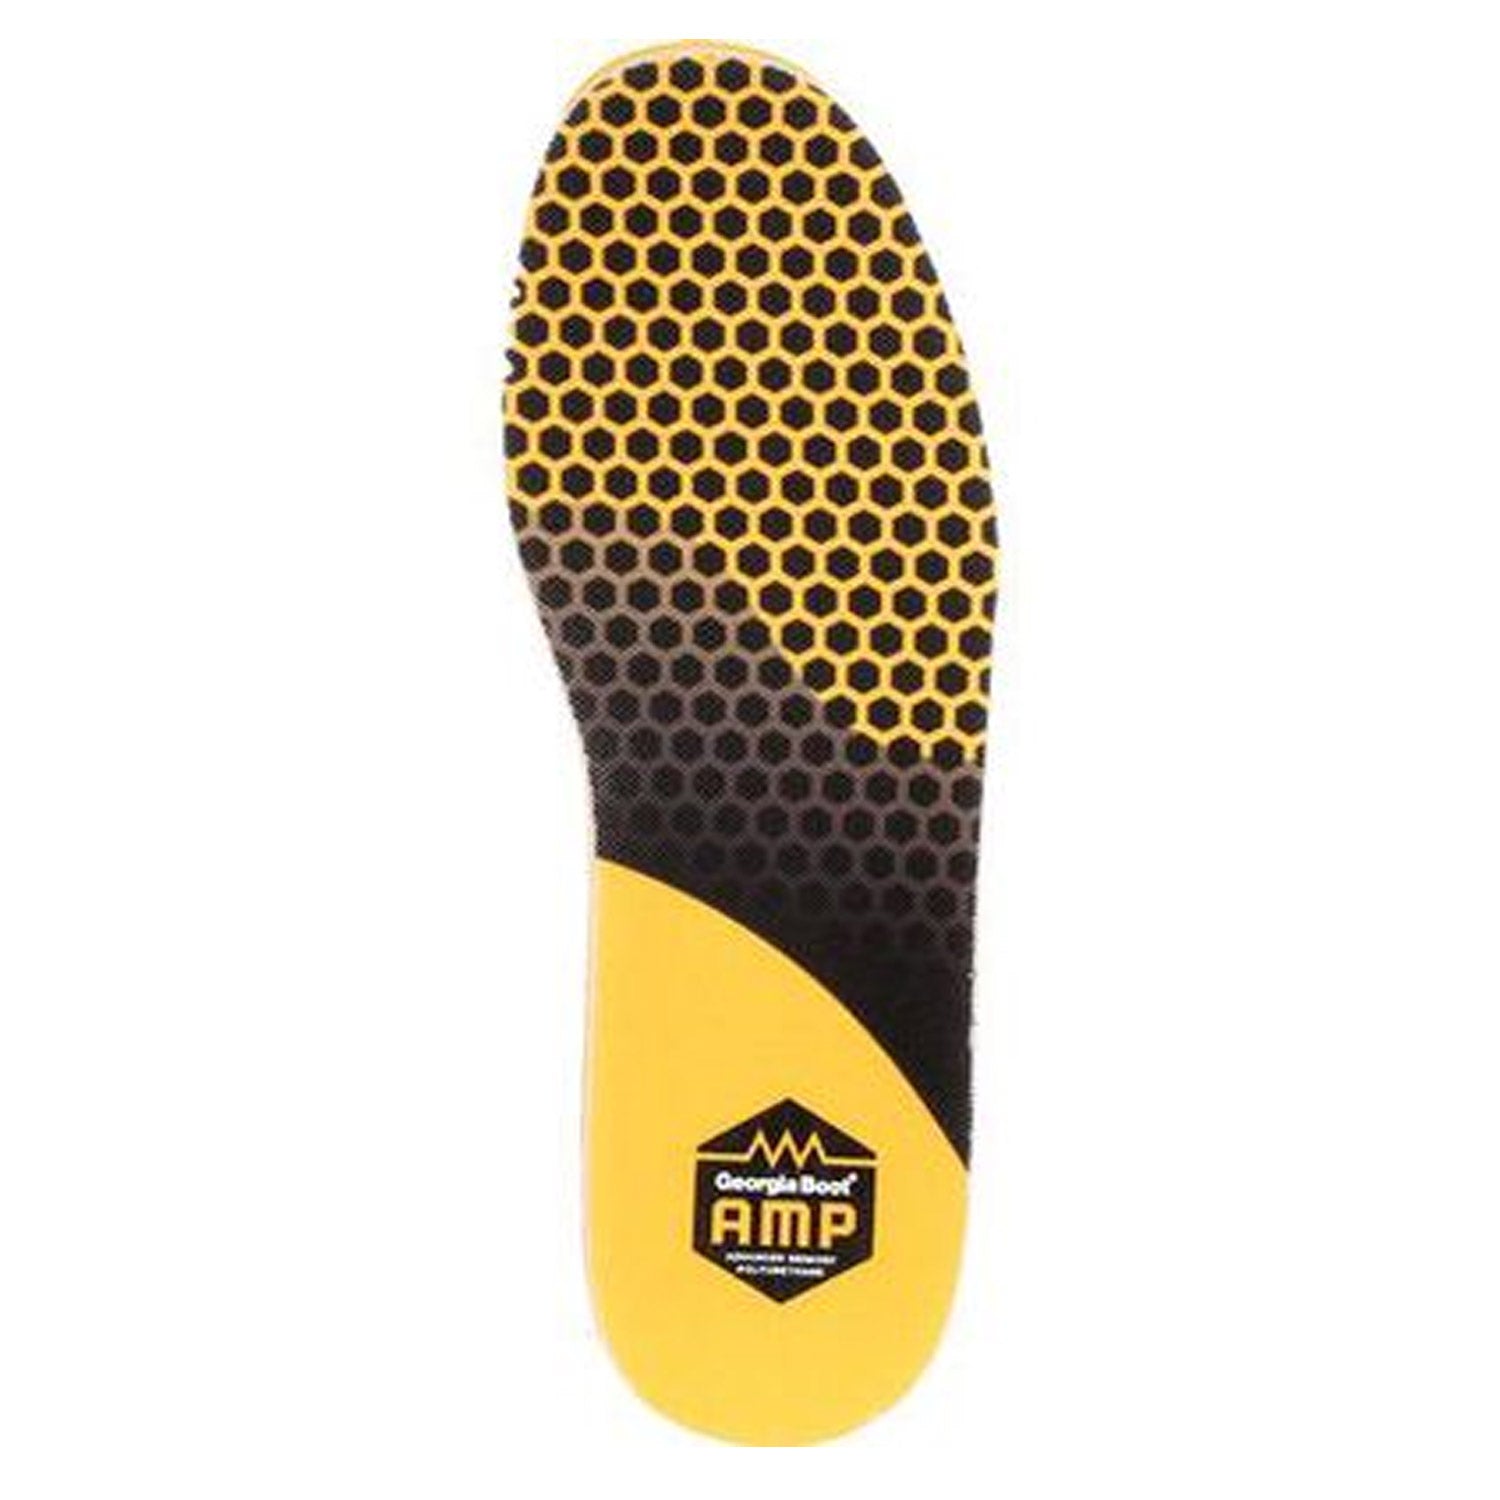 Georgia Boot Men's AMP Insole with Memory Foam - Work World - Workwear, Work Boots, Safety Gear